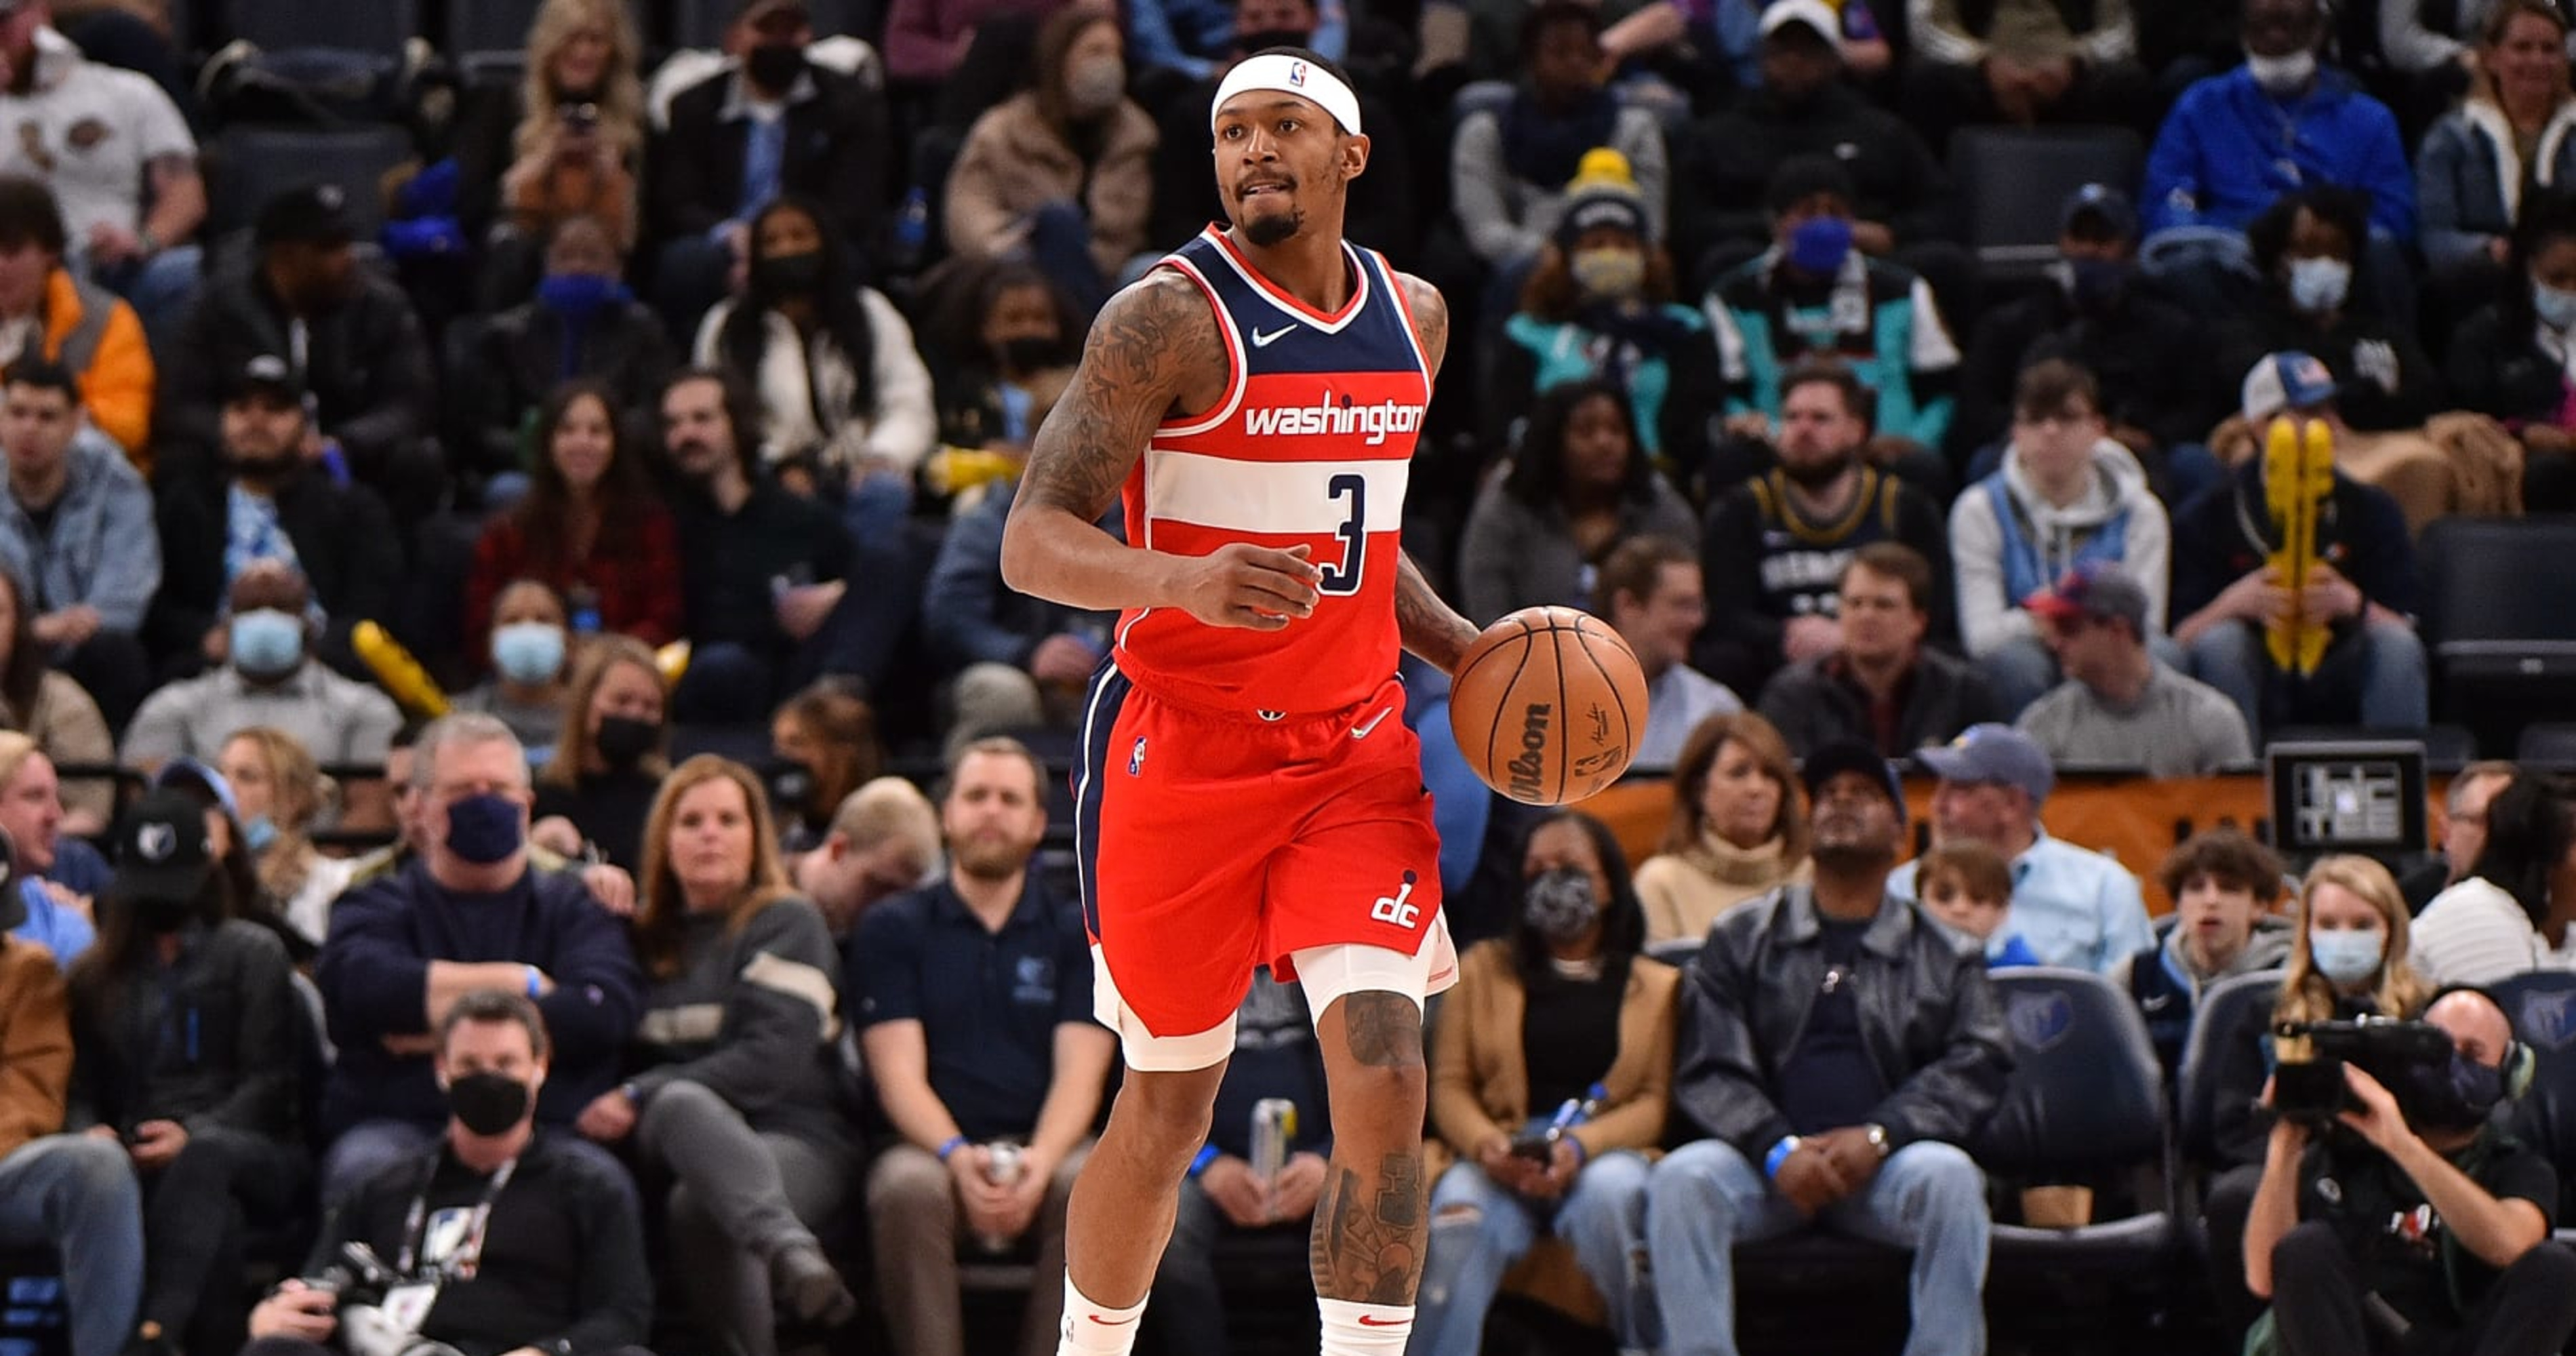 Wizards 202223 Schedule Top Games, Championship Odds and Record